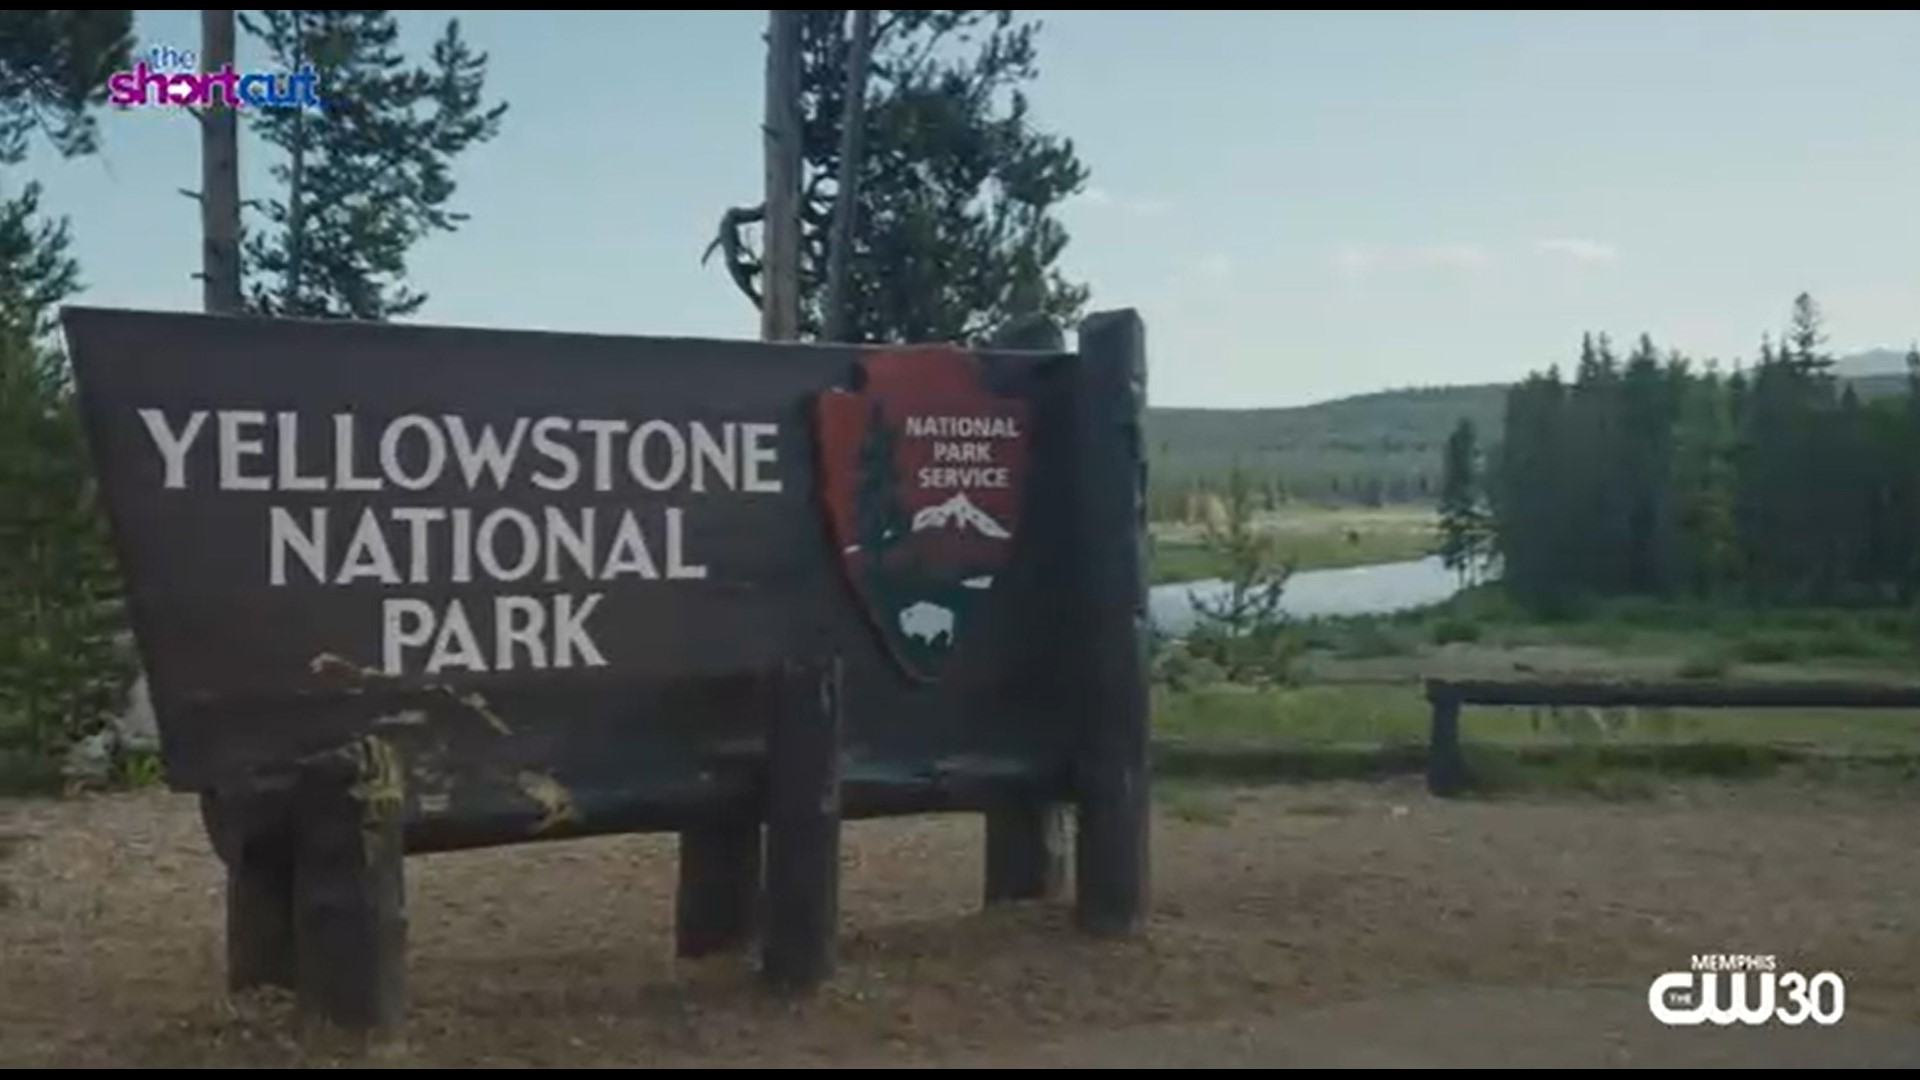 Yellowstone National Park is back in business after weeks of recovery! Here on "The Shortcut," we take a look at all of the natural wonders that is has to offer.